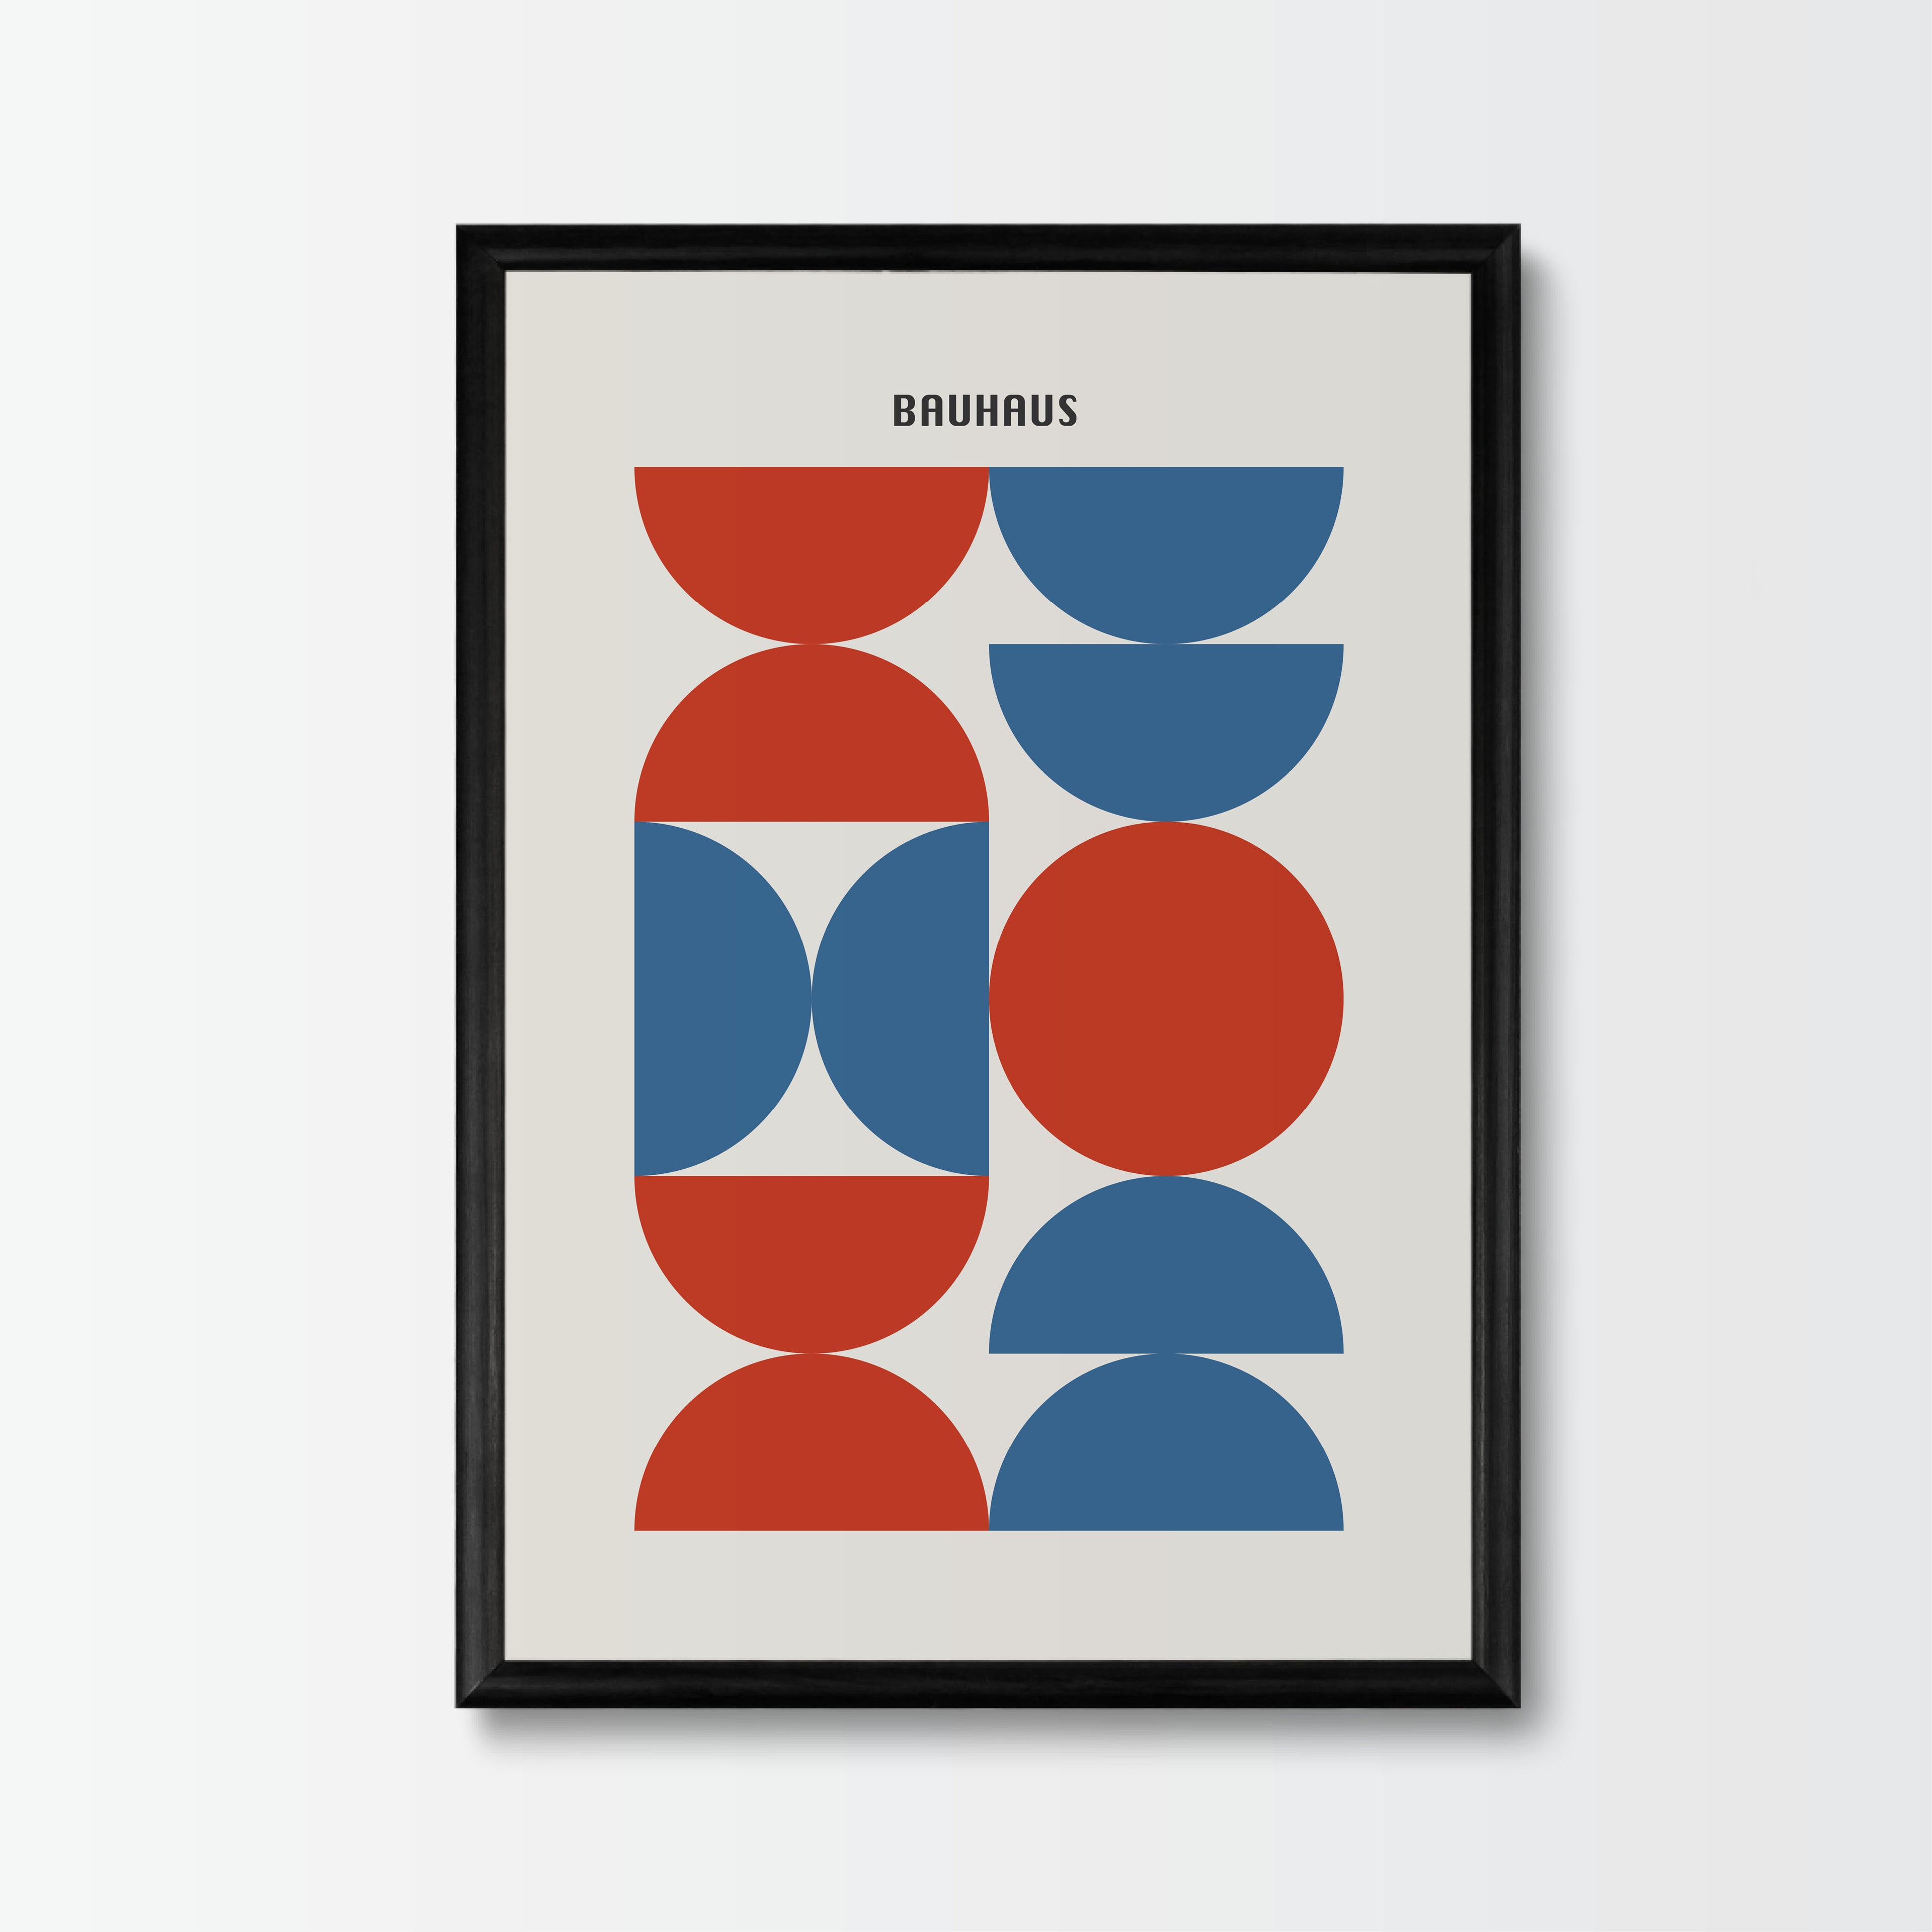 Bauhaus Poster Vibrant Circles - Add sophistication to your home